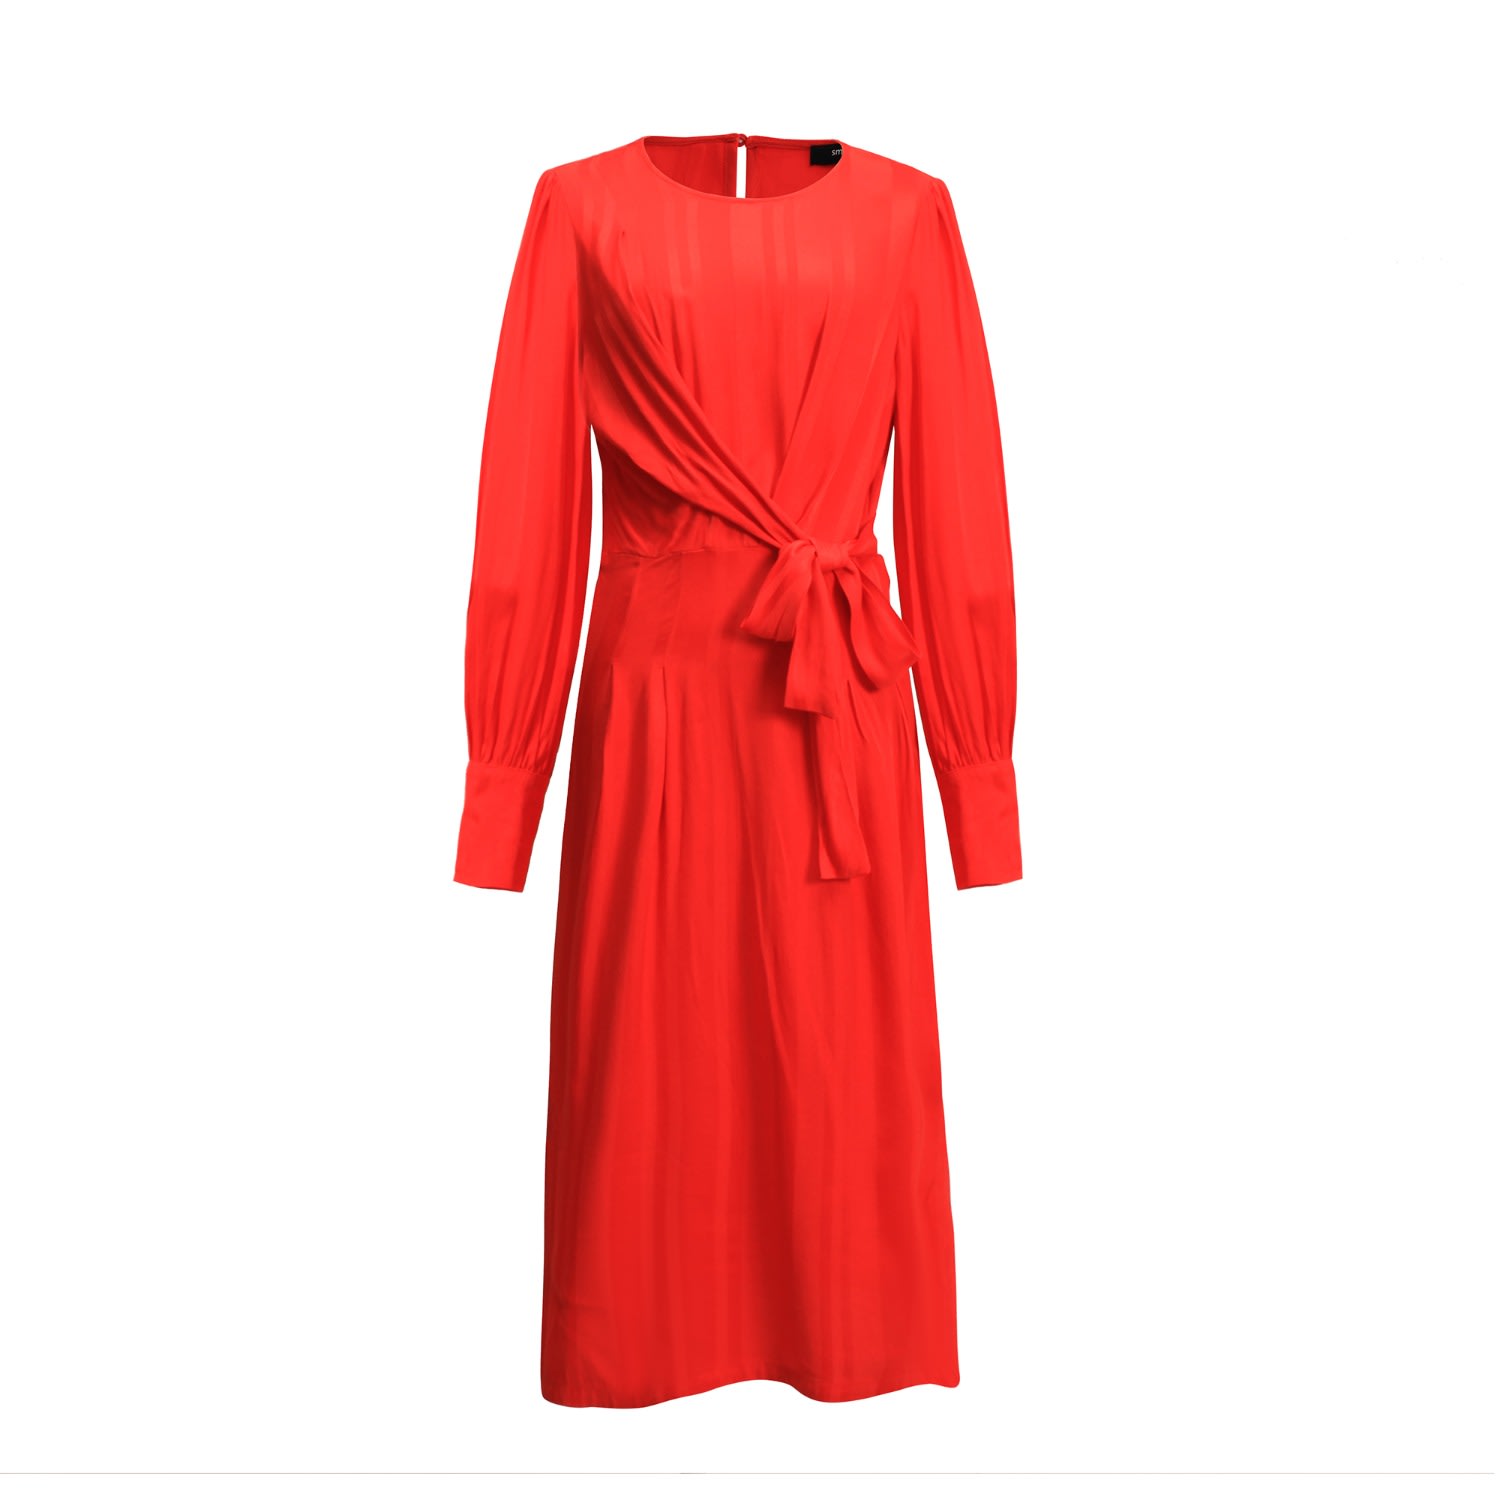 Women’s Draped Blouse Dress With Side Bow - Red Extra Small Smart and Joy